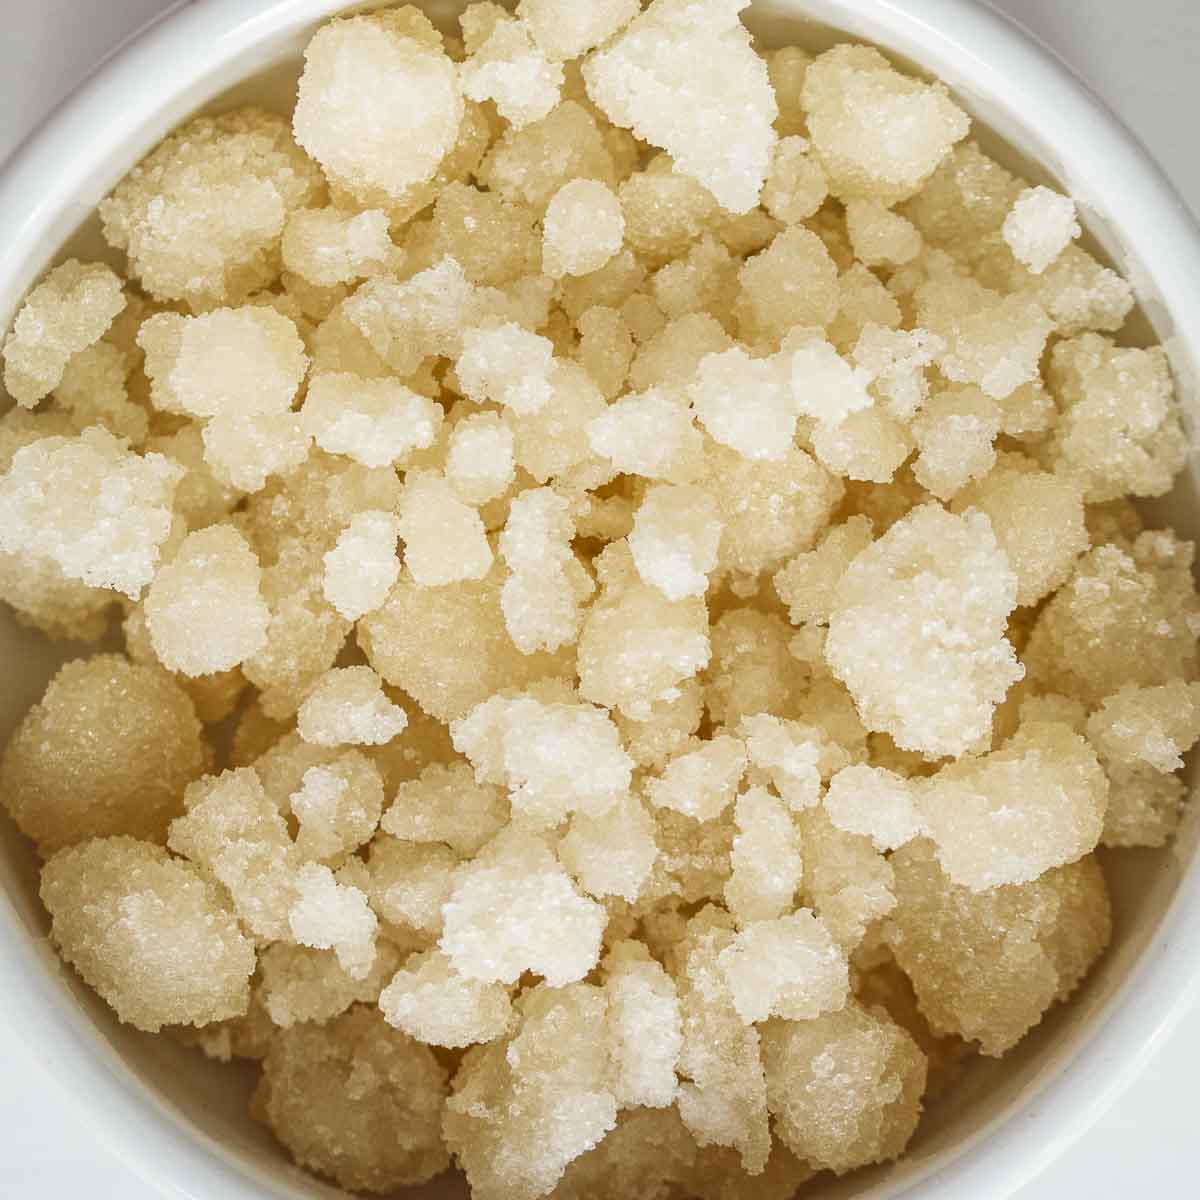 What Is Pearl Sugar, and How Is It Used?